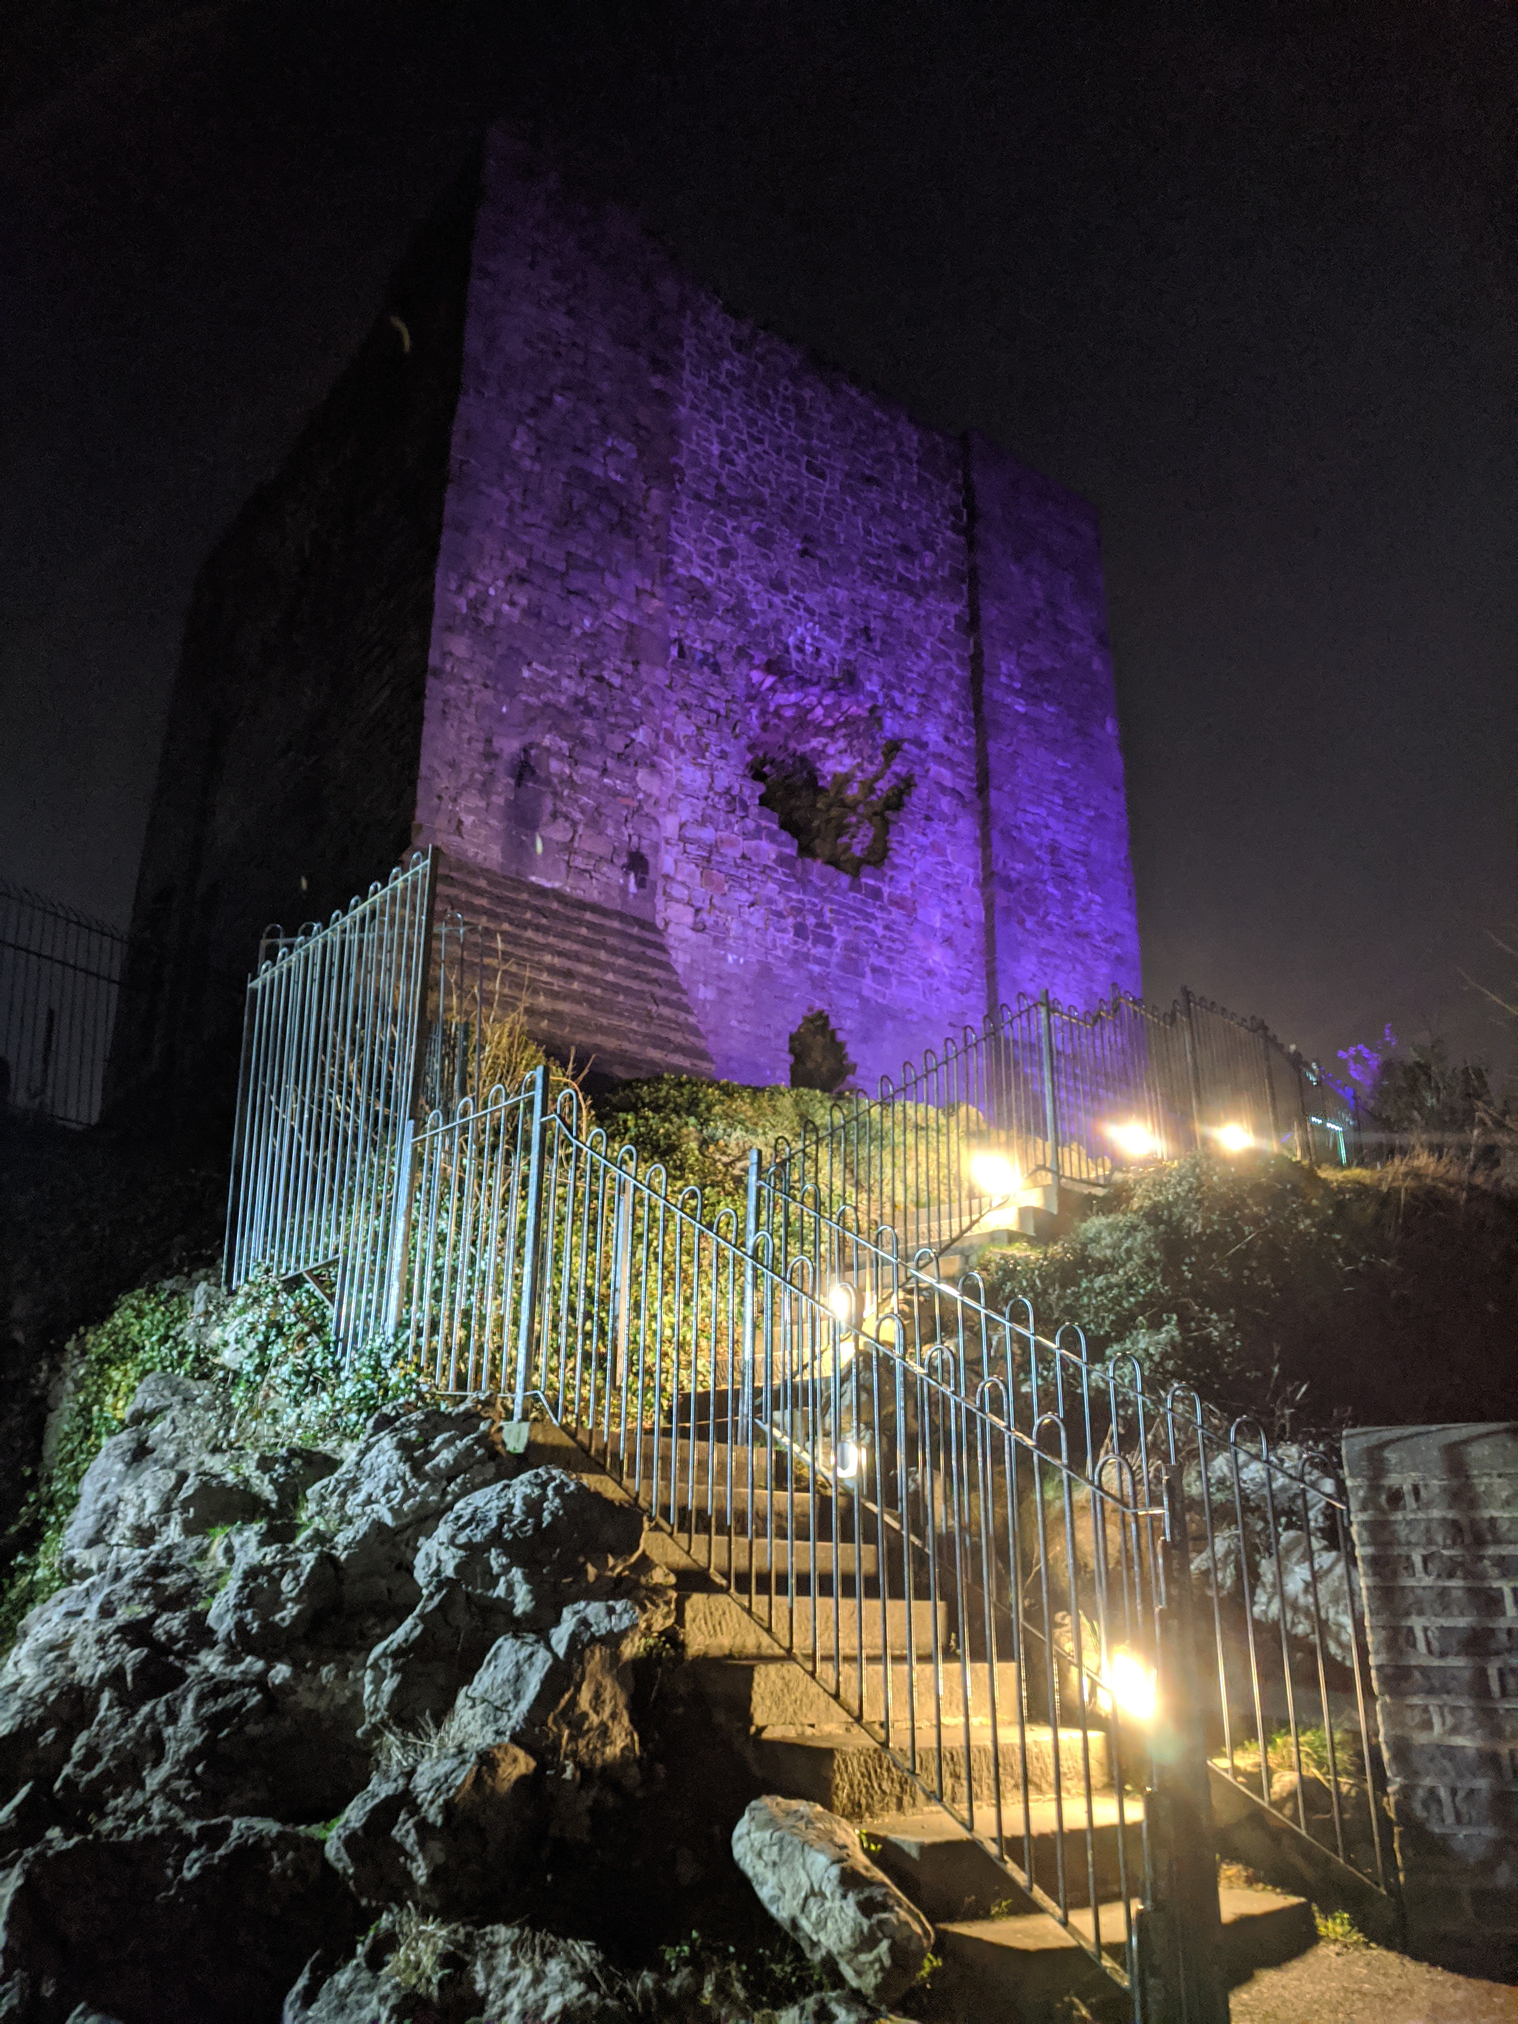 Clitheroe Castle lit up in purple at night